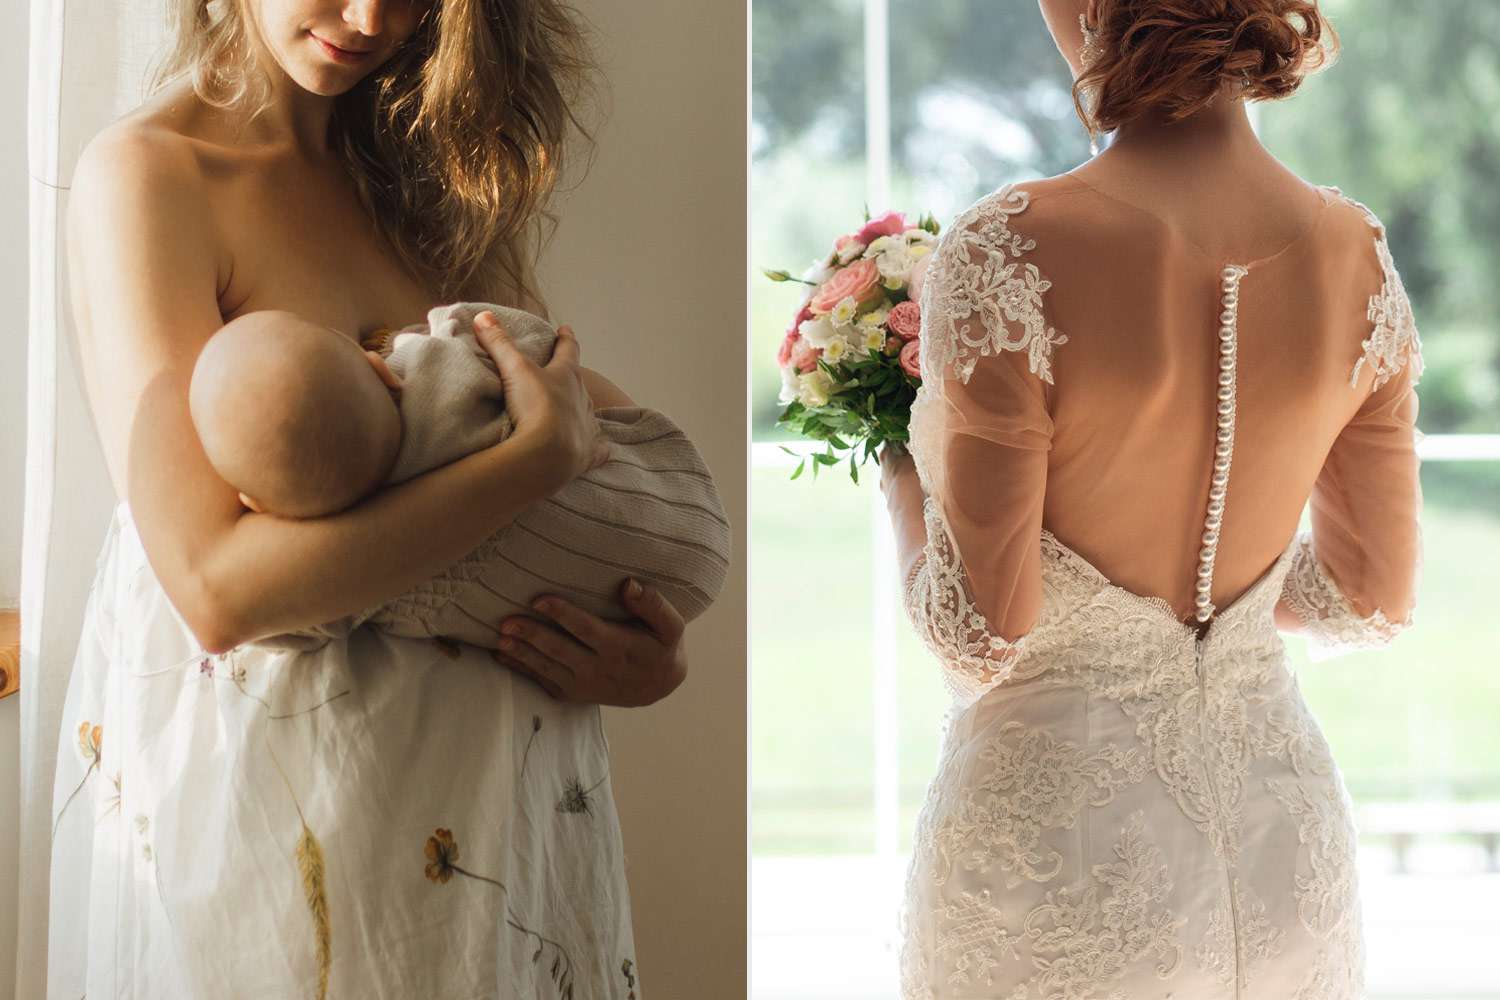 Breastfeeding Mom Declined Wedding Invite Because of 'No Children' Rule — Now the Bride and Groom are Angry